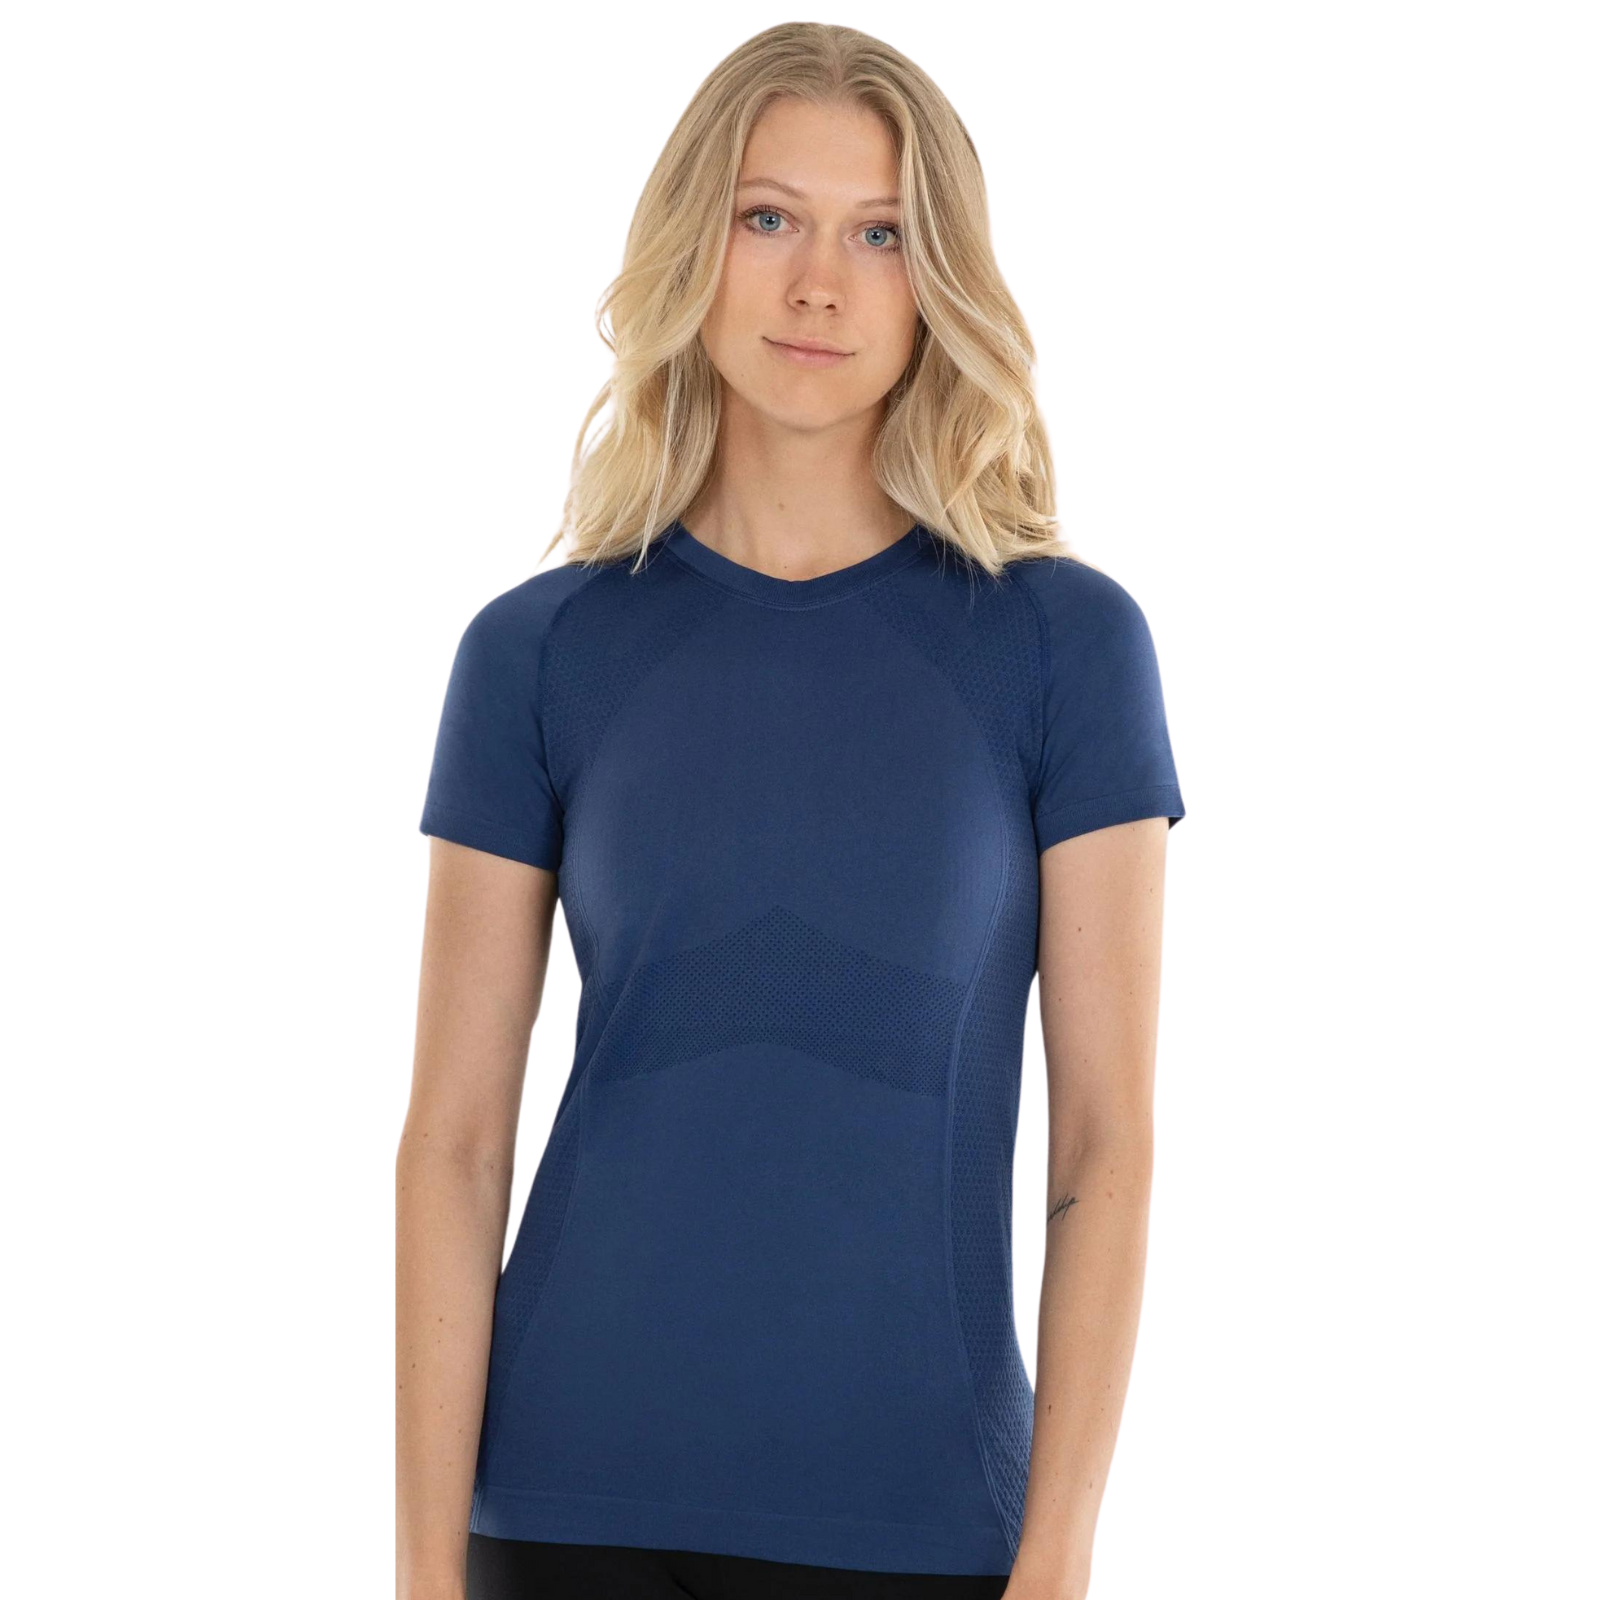 Anique Short Sleeve Crew Shirt in Blueberry - Women&#39;s Small (4-6)